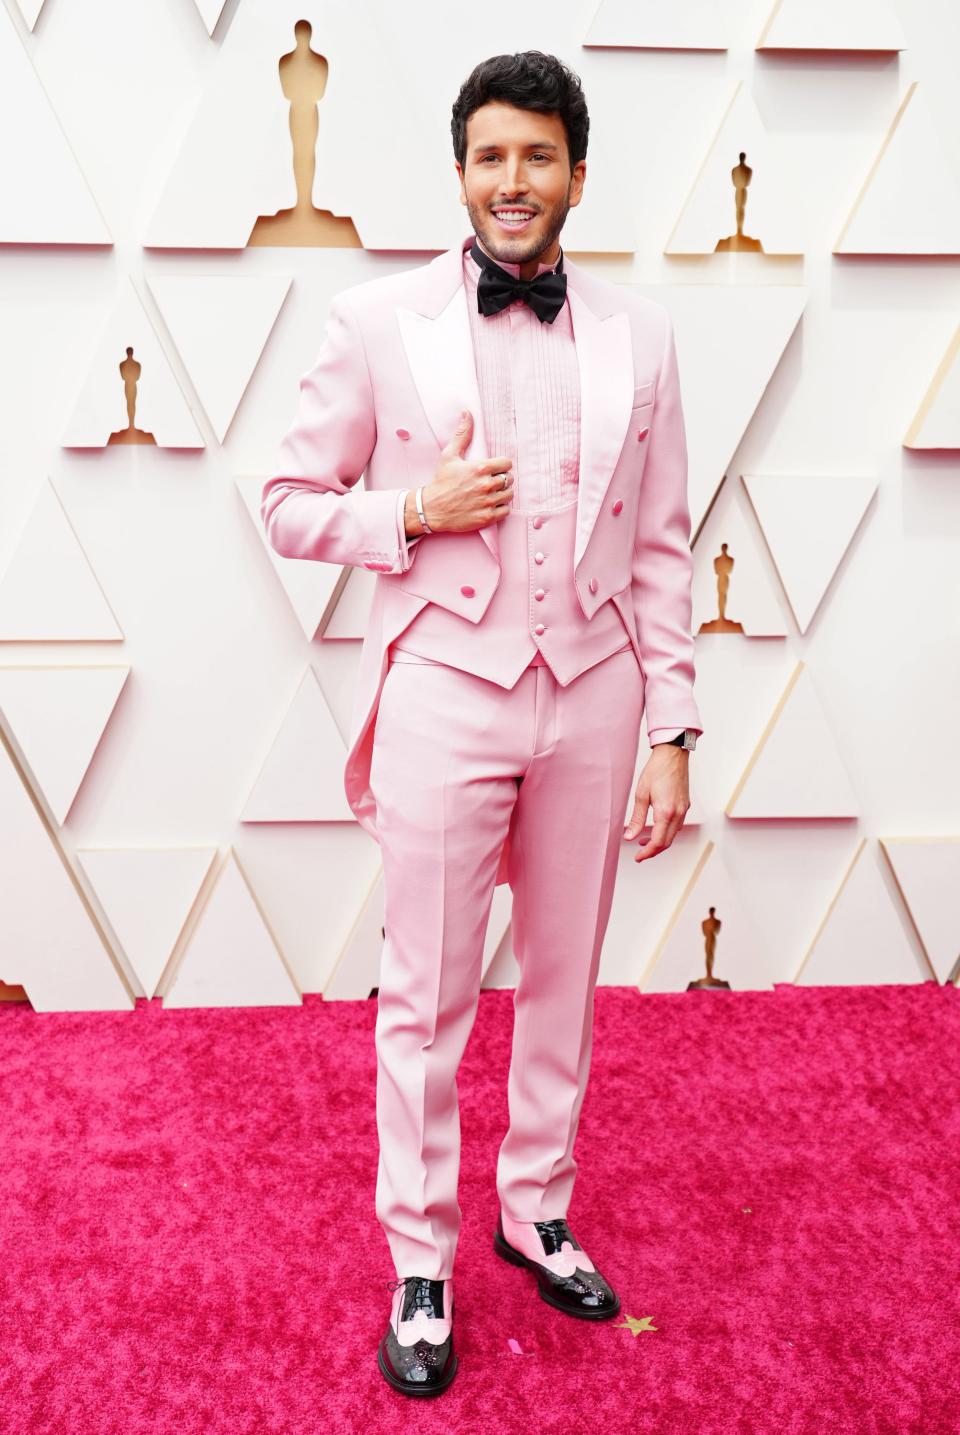 Sebastian in a pink suit with a waistcoat, low vest, shirt with pleating, trousers, and pink and black wing-toed shows. He has a black bow tie on.